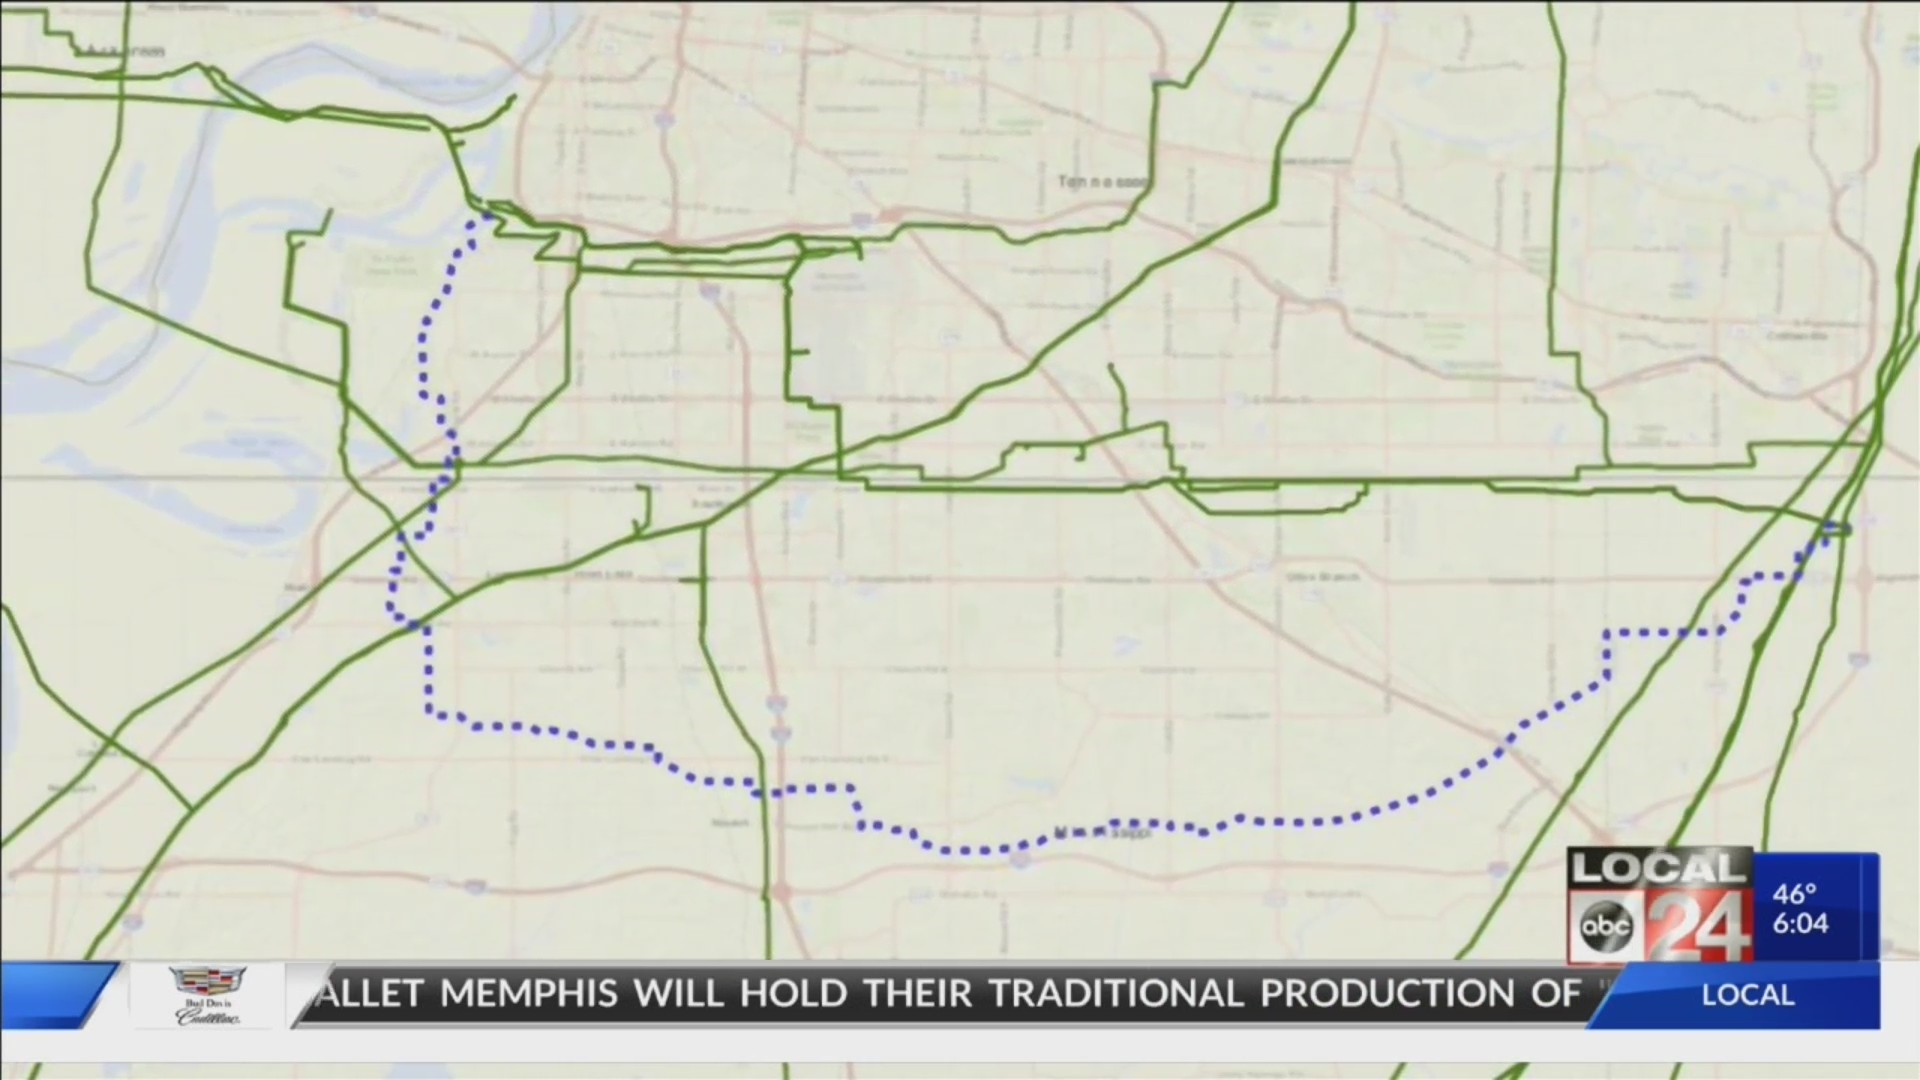 Proposed oil pipeline would snake from Memphis to Marshall County, Mississippi